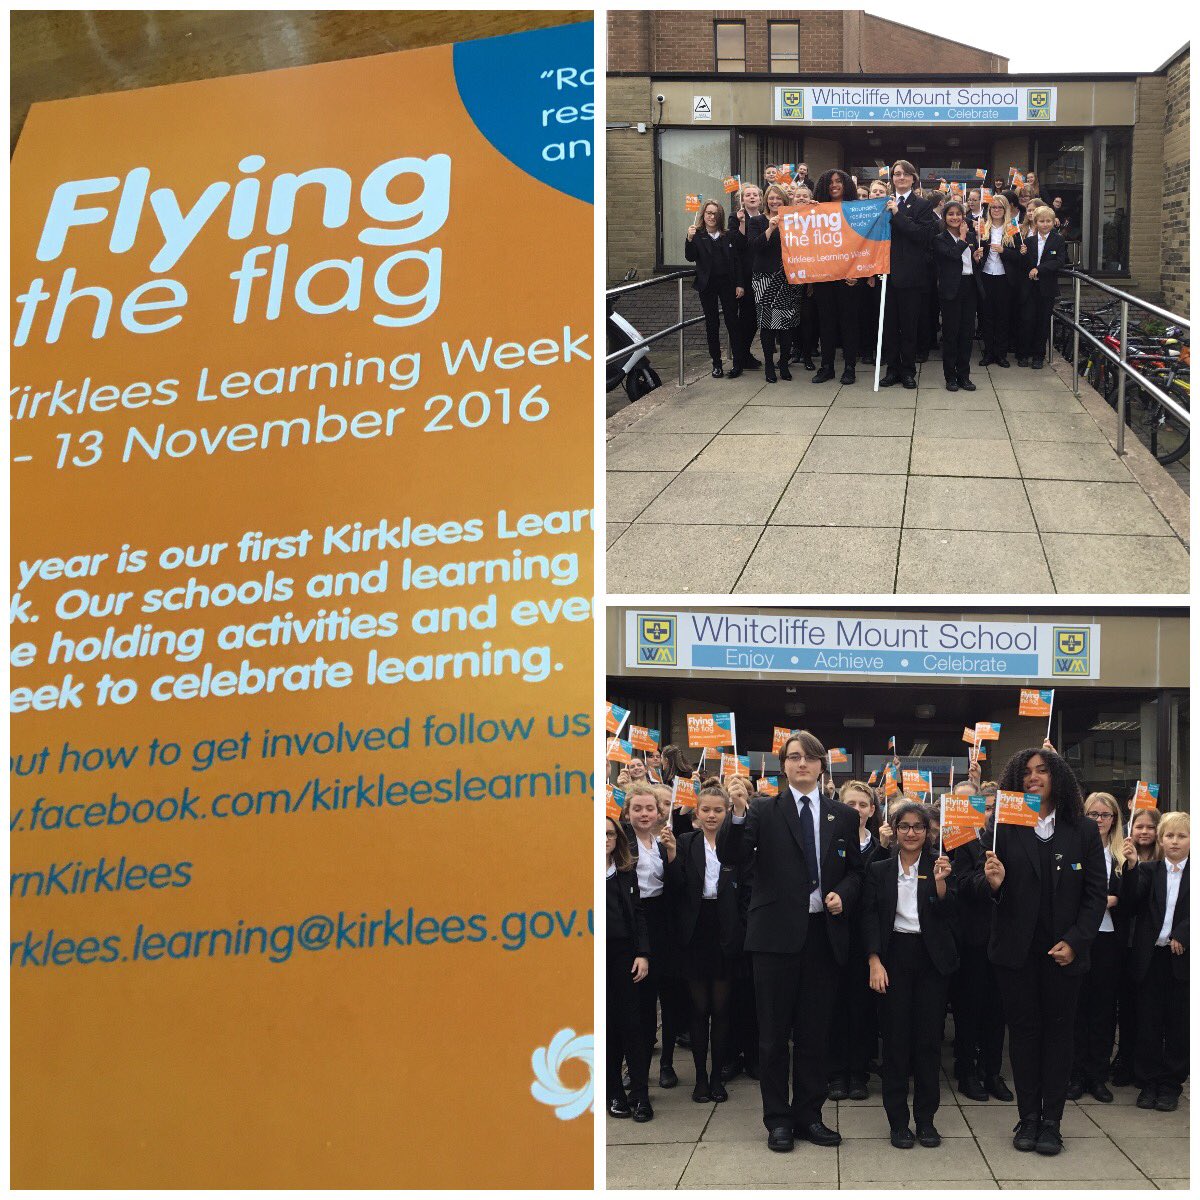 #Proud of our Student Leadership team for flying the flag for @LearnKirklees as part of Kirklees Learning Week.